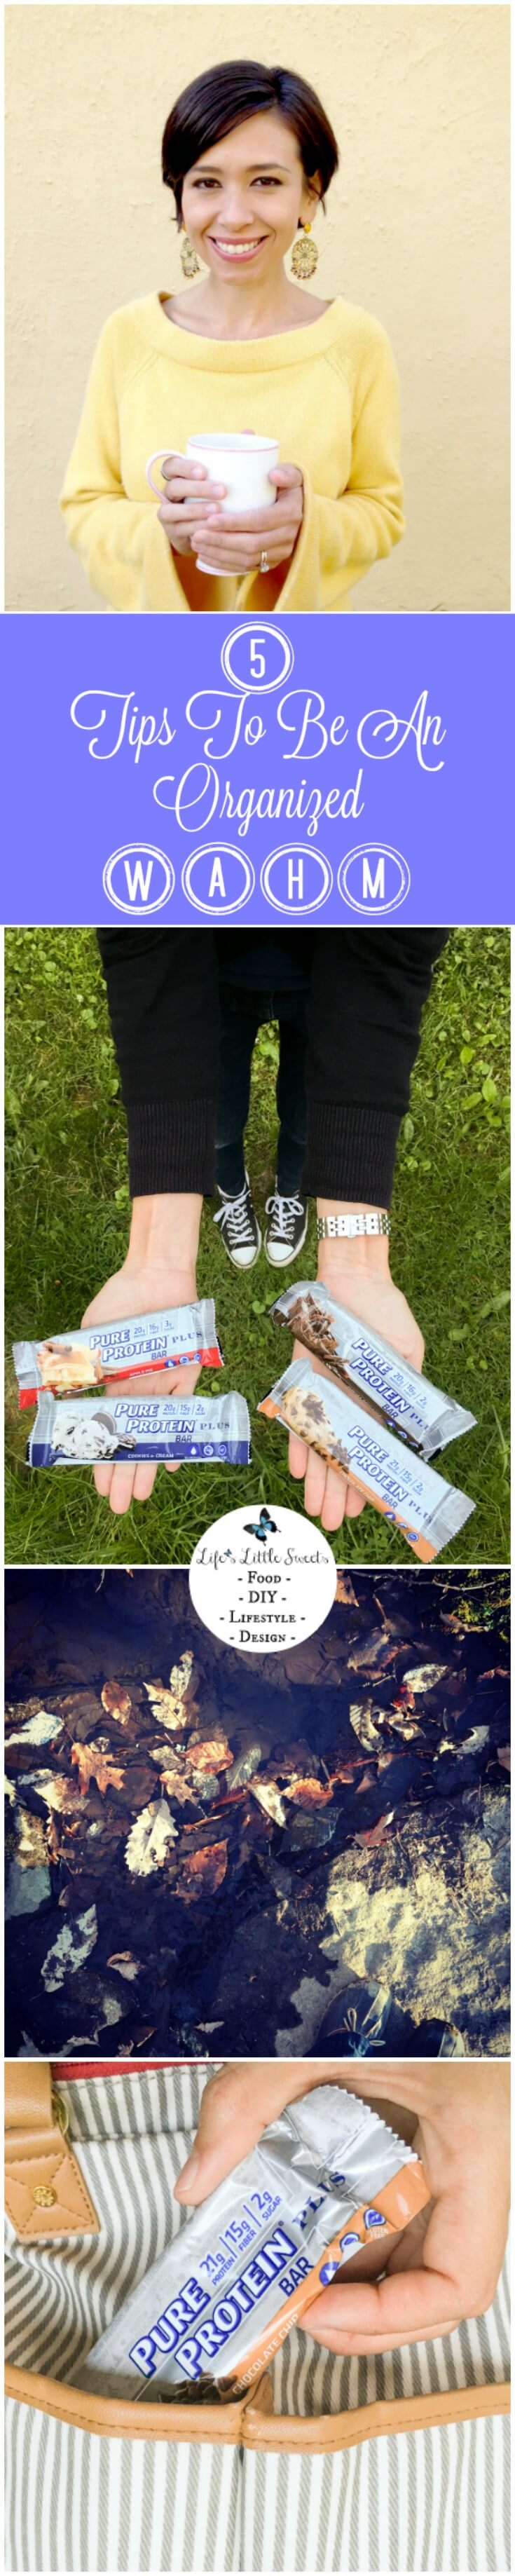 Check out my 5 Tips To Be An Organized WAHM, a.k.a., Work at Home Mom. Check out how Pure Protein Plus Bars help me keep on track during my day! Be sure to enter the sweepstakes!